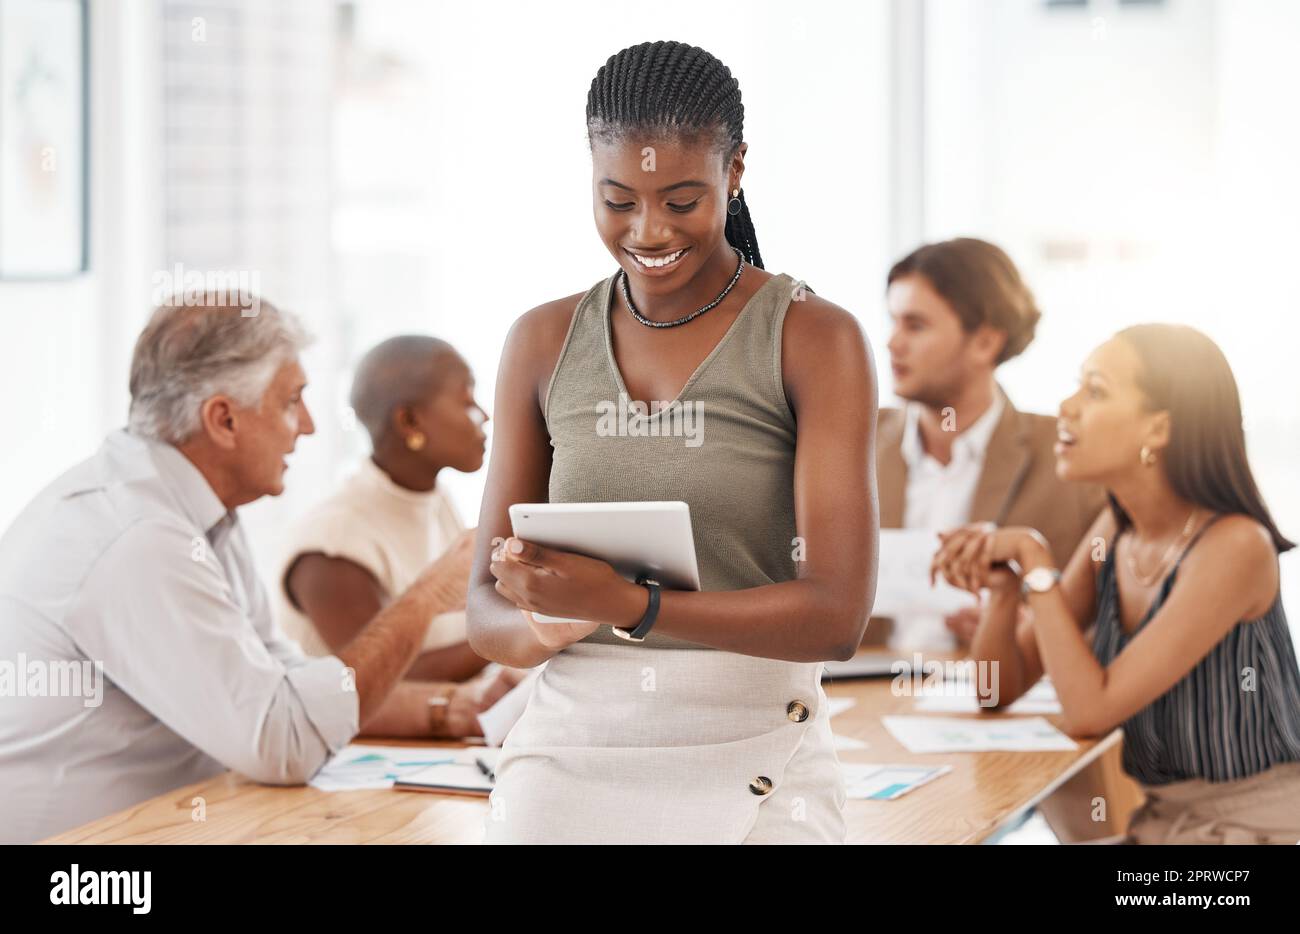 Tablet and business woman with solution, leadership and company goal for success. Happy smile of manager in a team building discussion working on people management strategy on a planner software app Stock Photo